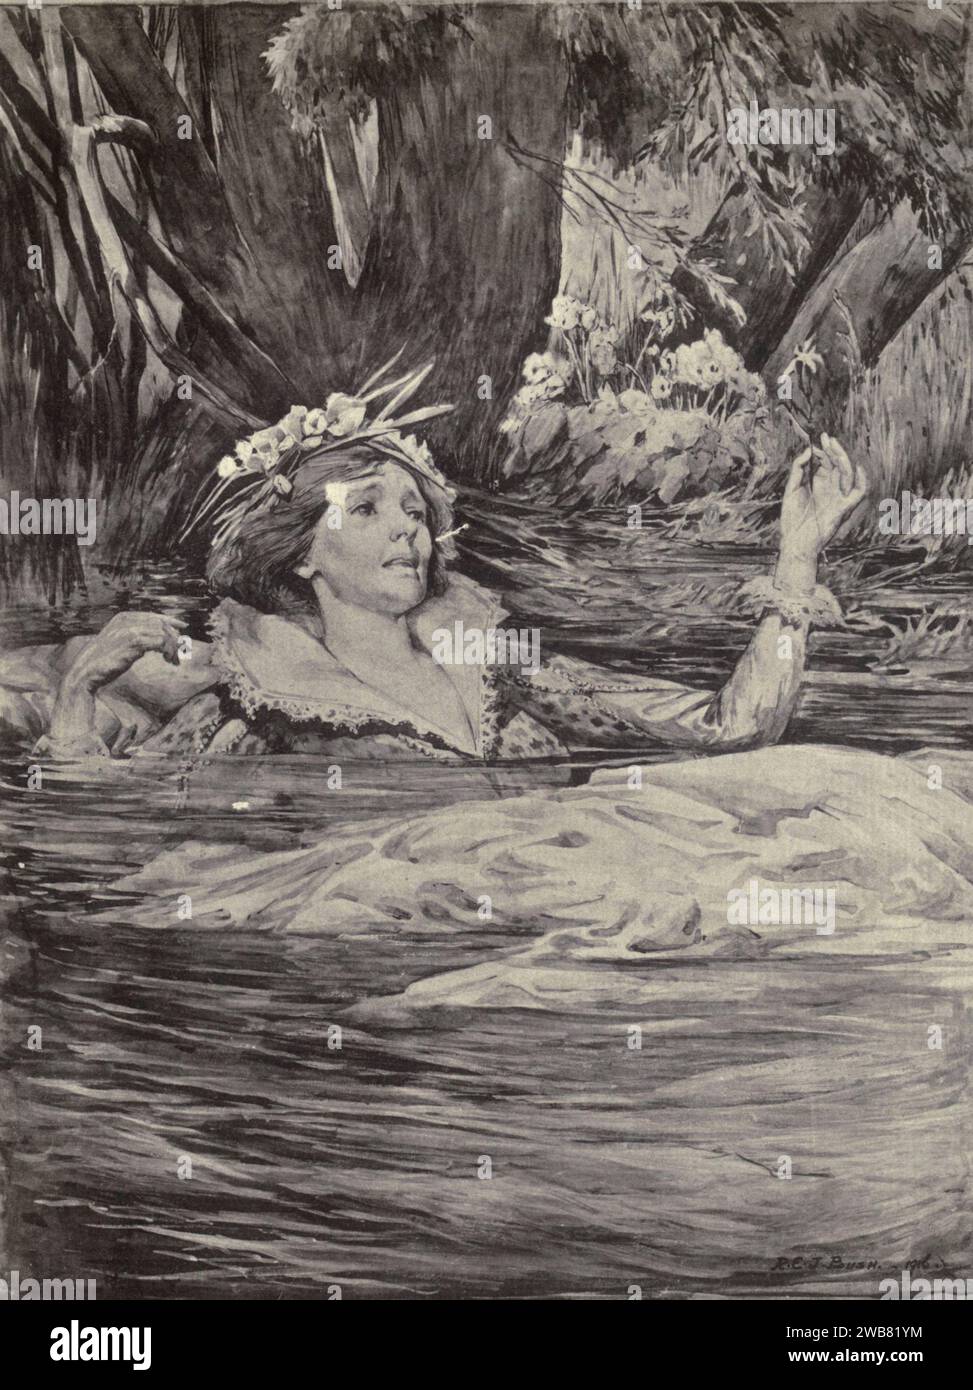 Ophelia. [Hamlet] by R. E. J. BUSH, from A Tribute to the genius of William Shakespeare; being the programme of a performance at Drury Lane Theatre on May 2, 1916, the tercentenary of his death; humbly offered by the players and their fellow-workers in the kindred arts of music & painting MACMILLAN AND CO., LIMITED ST. MARTIN'S STREET, LONDON 1916 Stock Photo